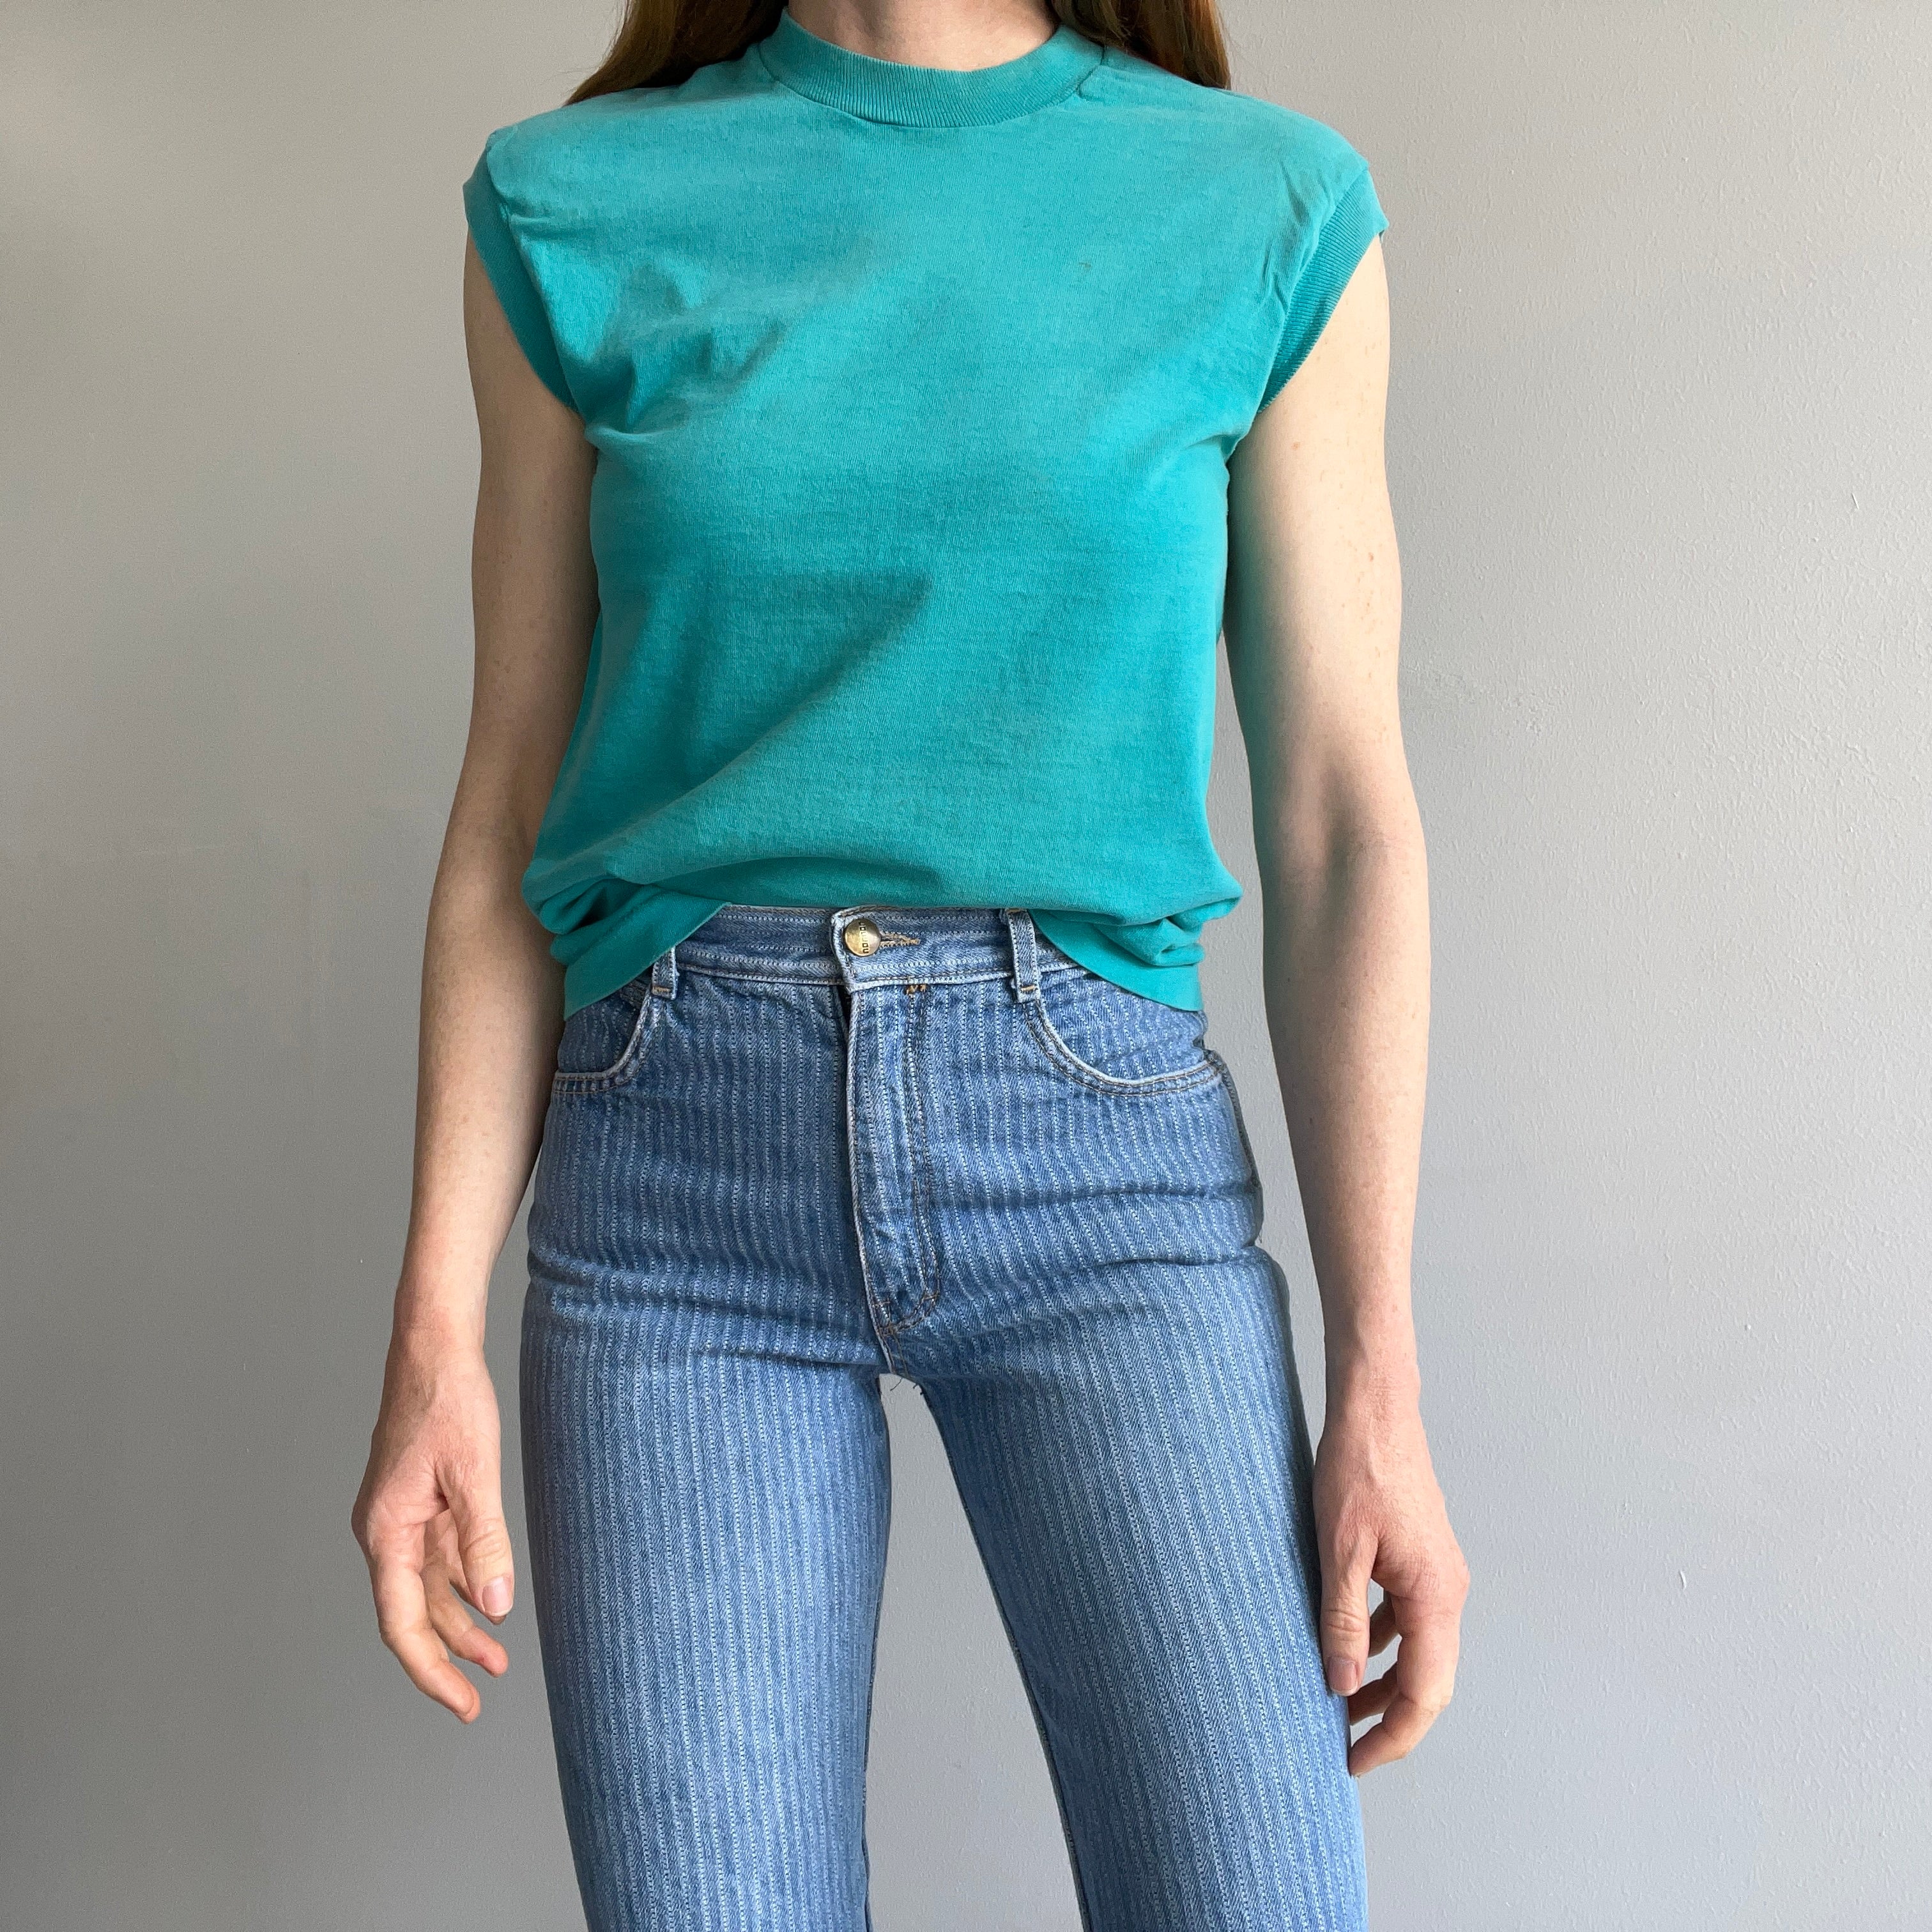 1980s Rad Sun Fading and Whiskering Teal Muscle Pocket Tank - YES!